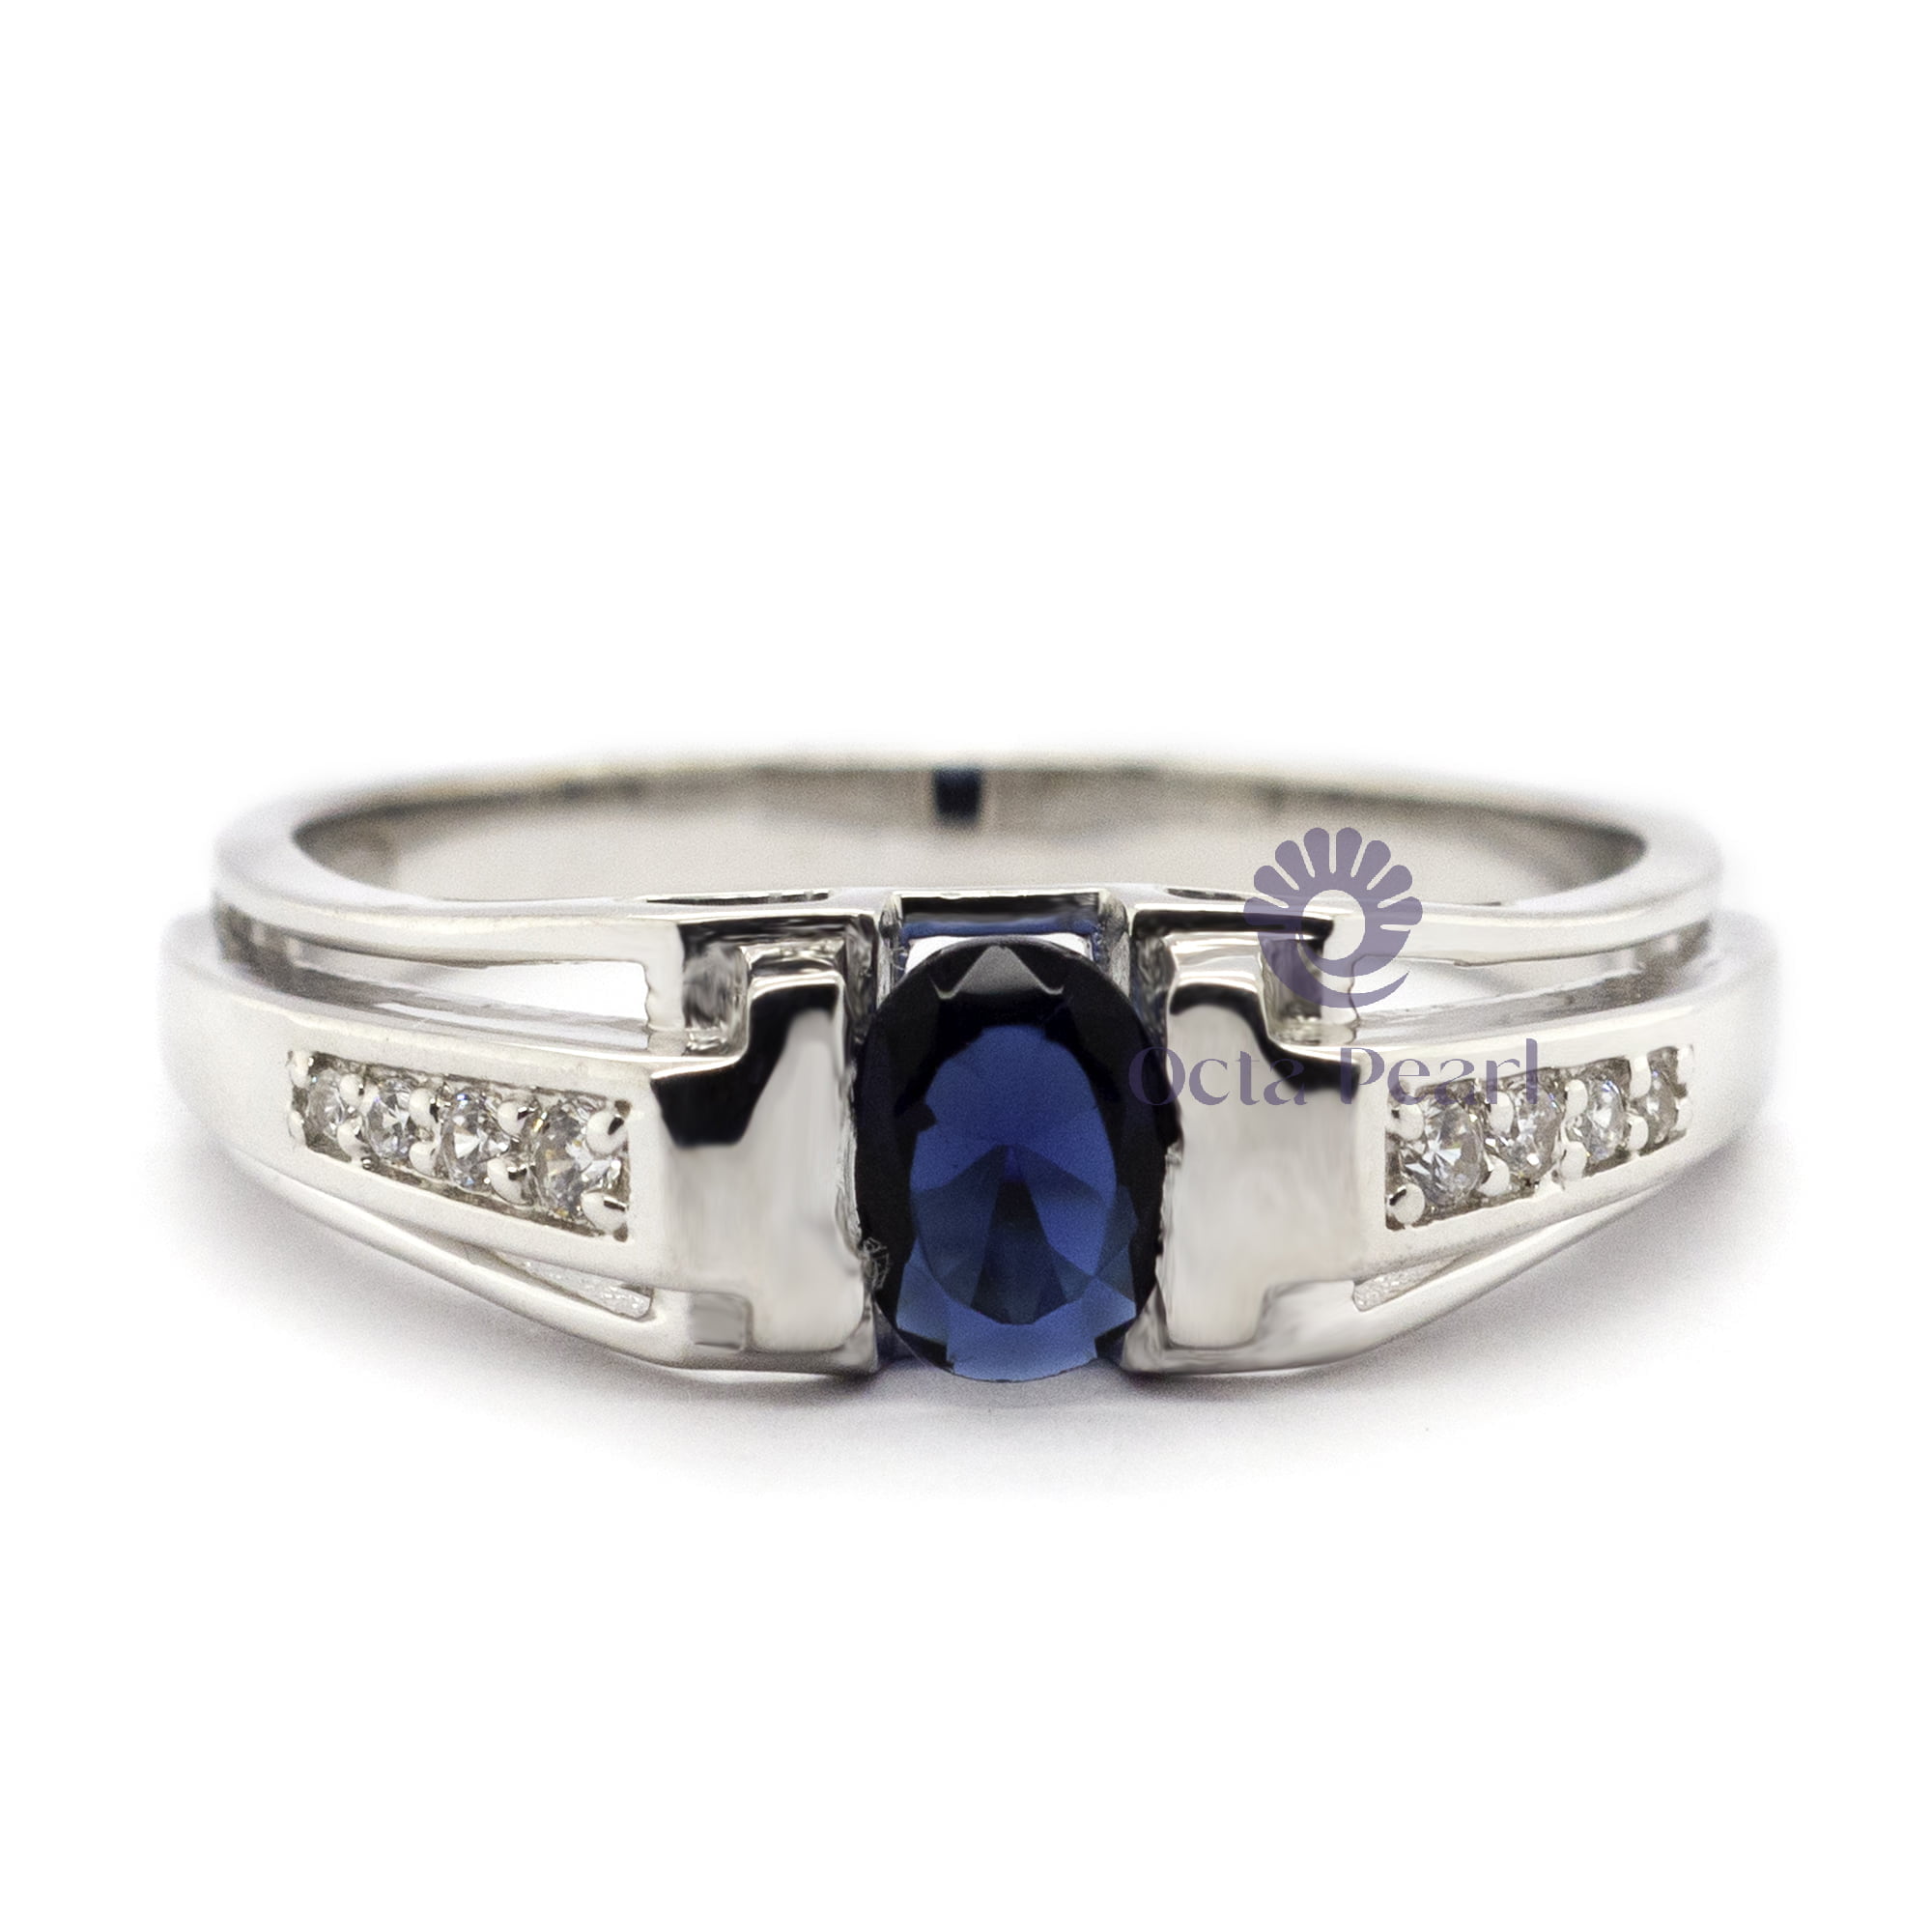 Blue Sapphire Oval With CZ Round Stone Men's Ring Father's Day Gift